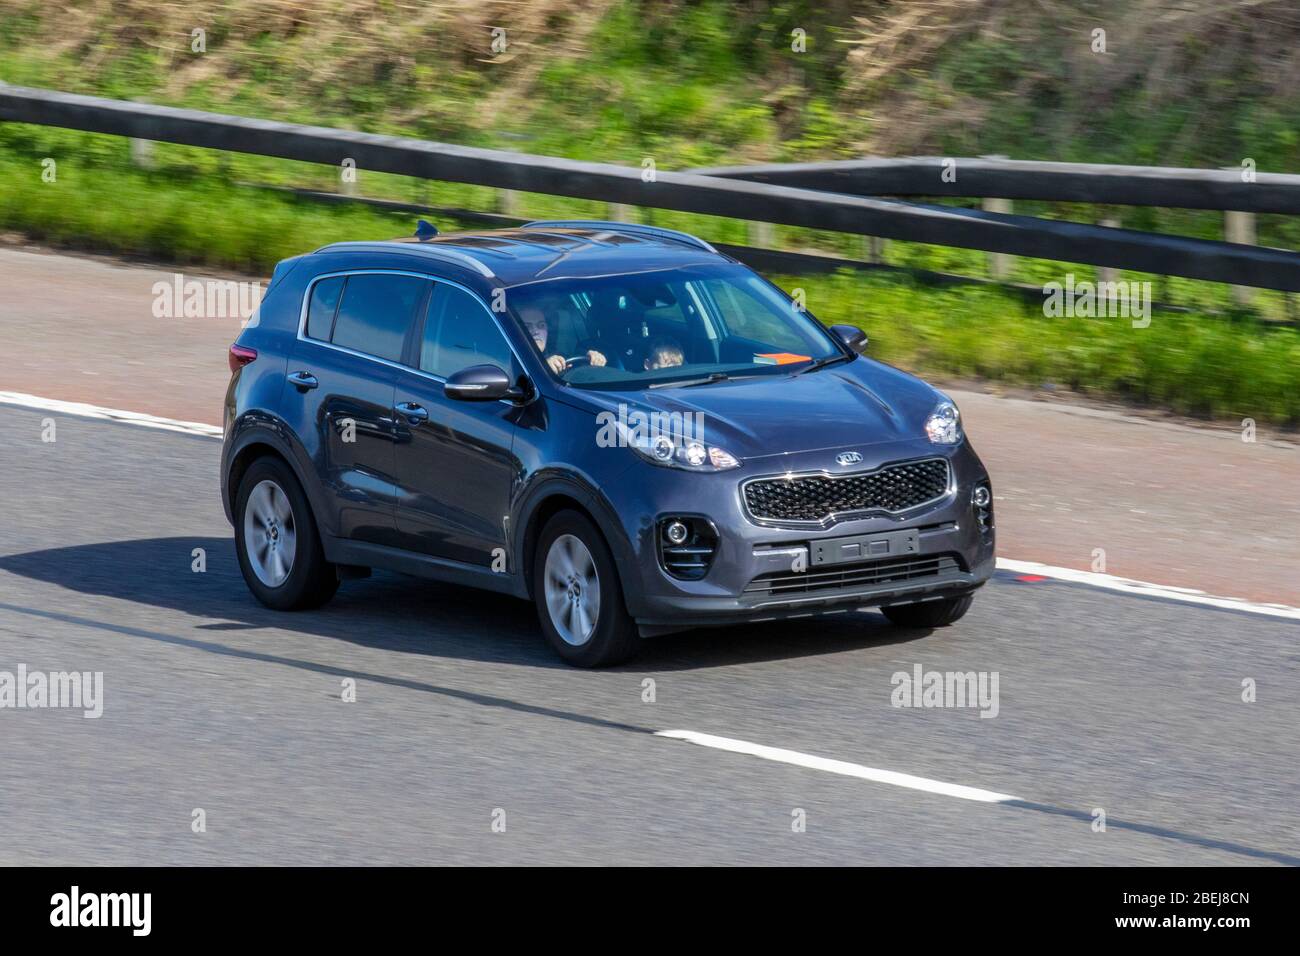 2020 Kia Sportage With No Front Number Plate Vehicular Traffic Moving Vehicles Driving Vehicle On Uk Roads Motors Motoring On The M6 Motorway Highway Stock Photo Alamy